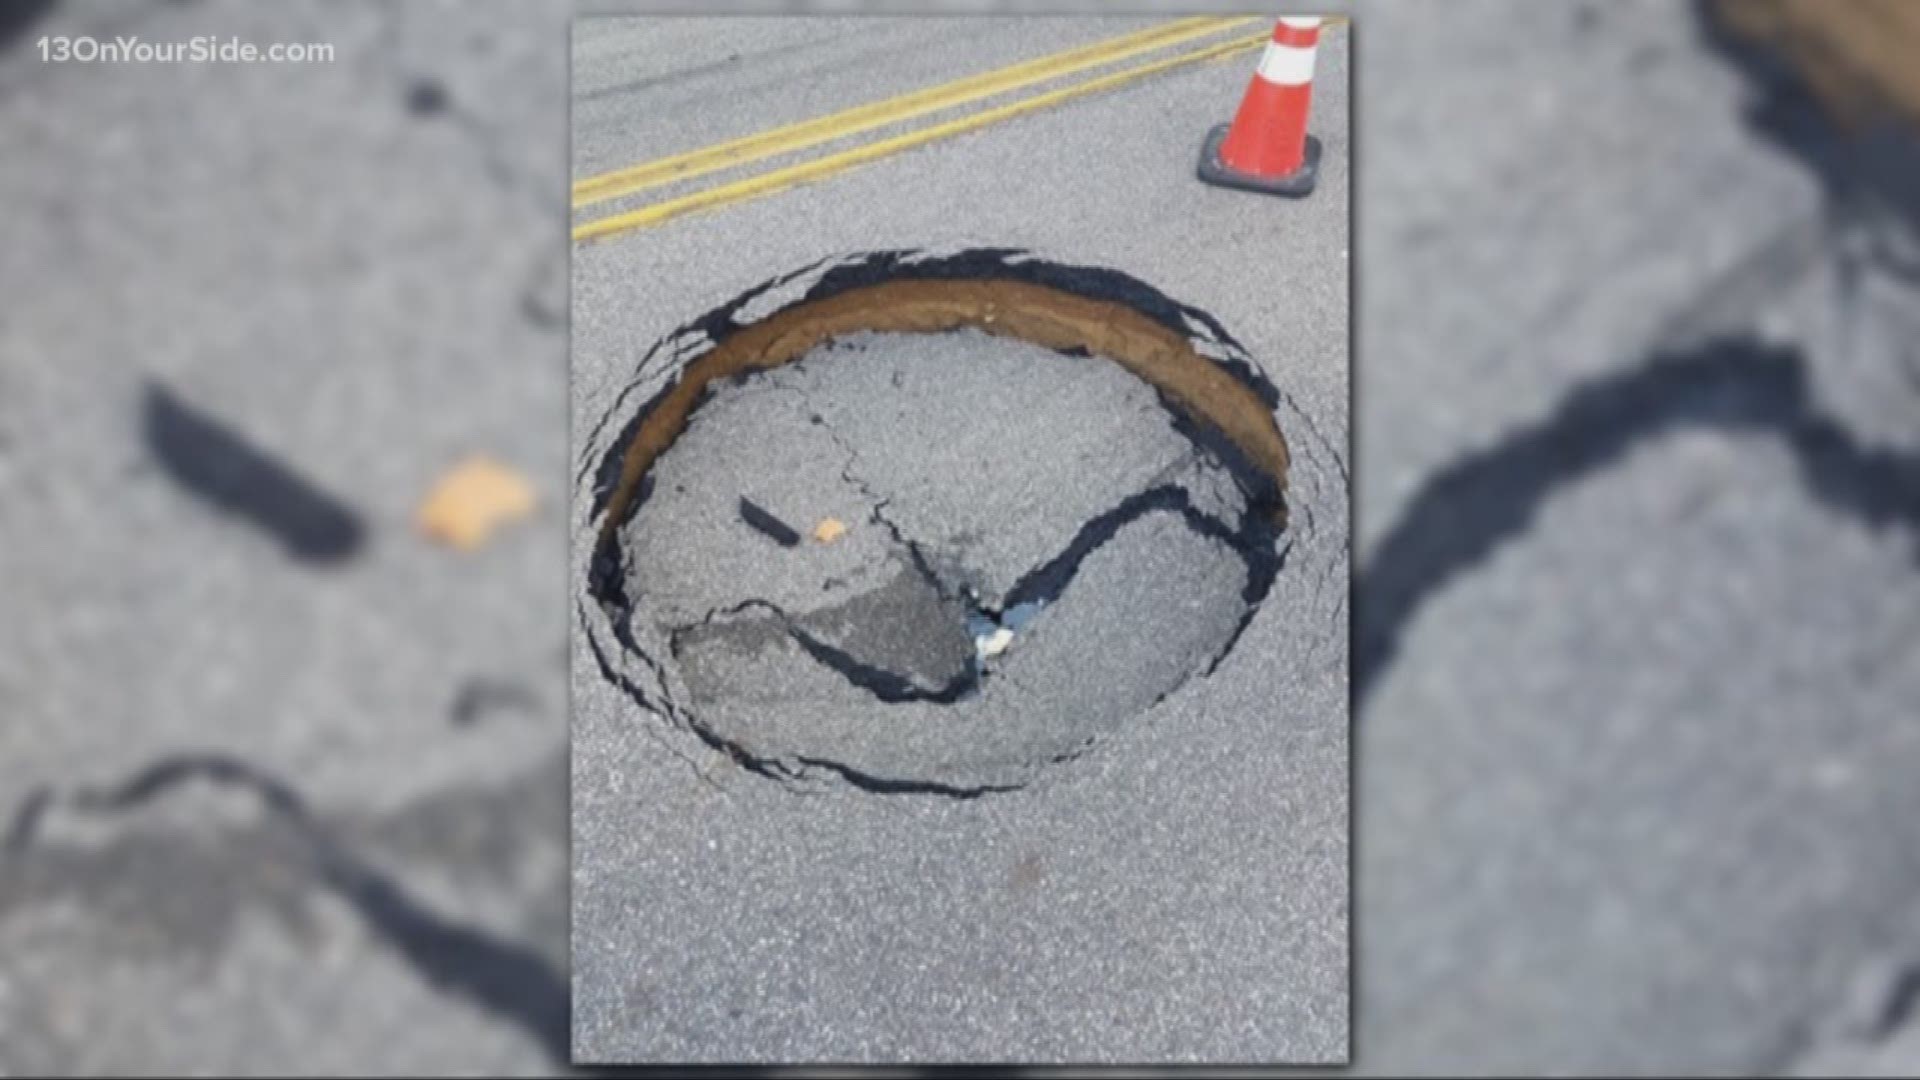 A large sinkhole in Battle Creek has closed South Helmer Road between Beckley Road and Tiffany Lane. The City of Battle Creek said the sink hole is near a culvert and city crews are monitoring and working to address the situation.